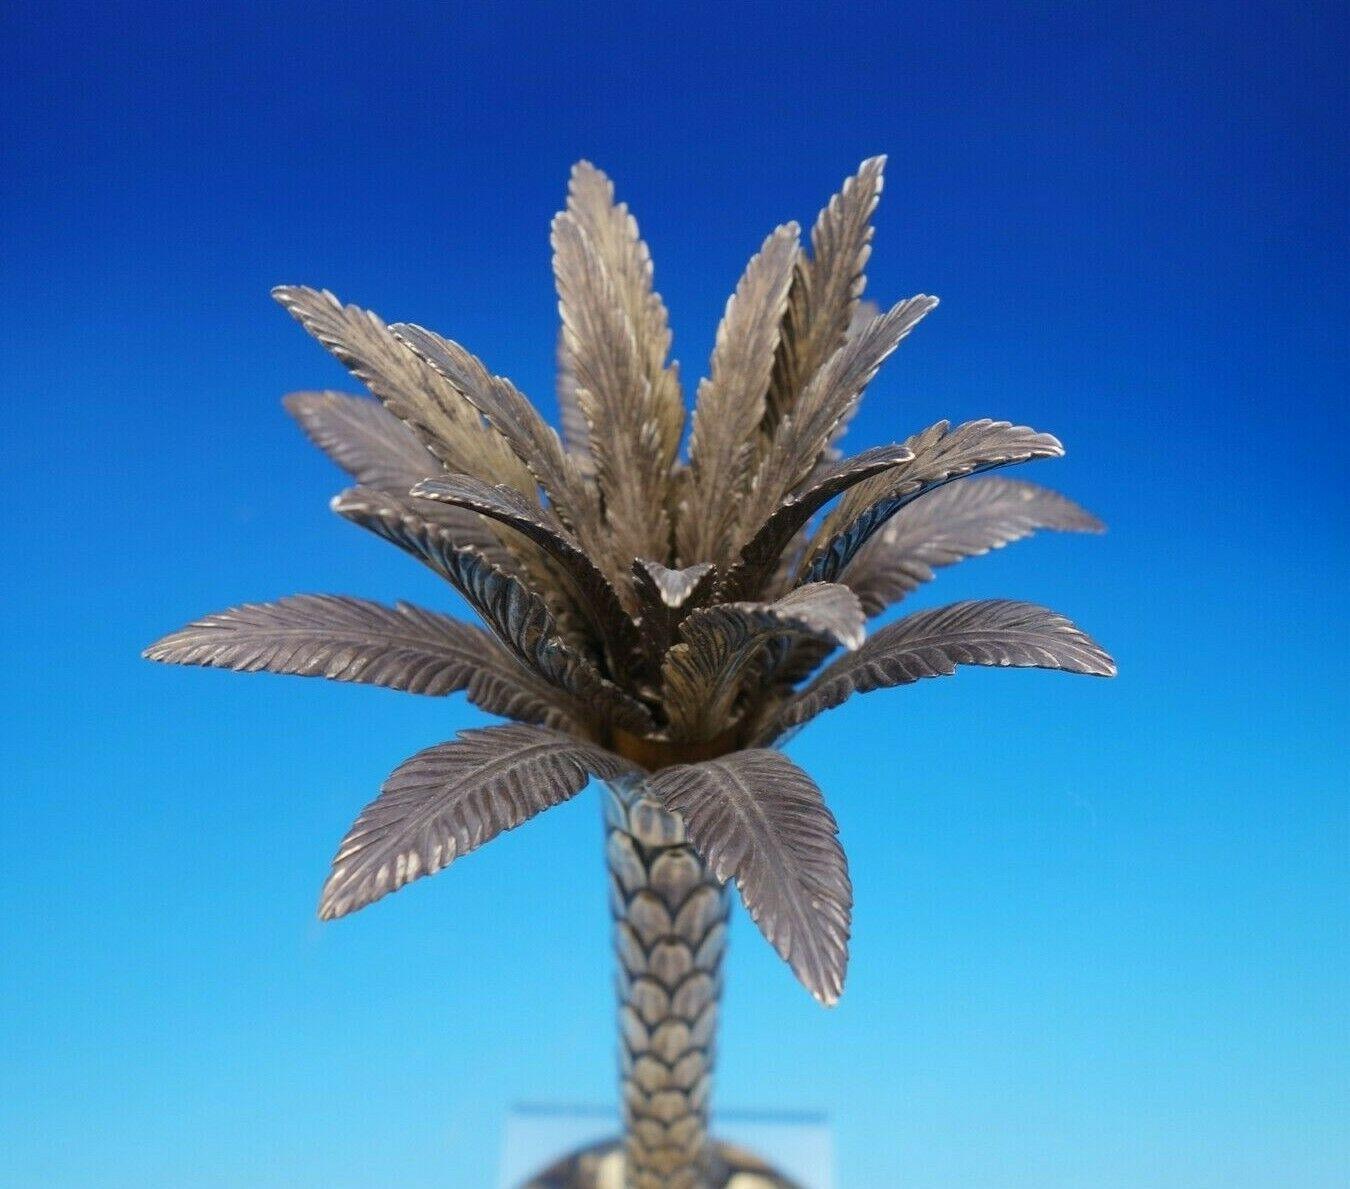 Palm Tree by Tiffany & Co.

Exceptional three-dimensional Palm Tree by Tiffany & Co sterling silver vermeil (gilded) candlestick by DeVecchi Gabriele. This figural candlestick measures 5